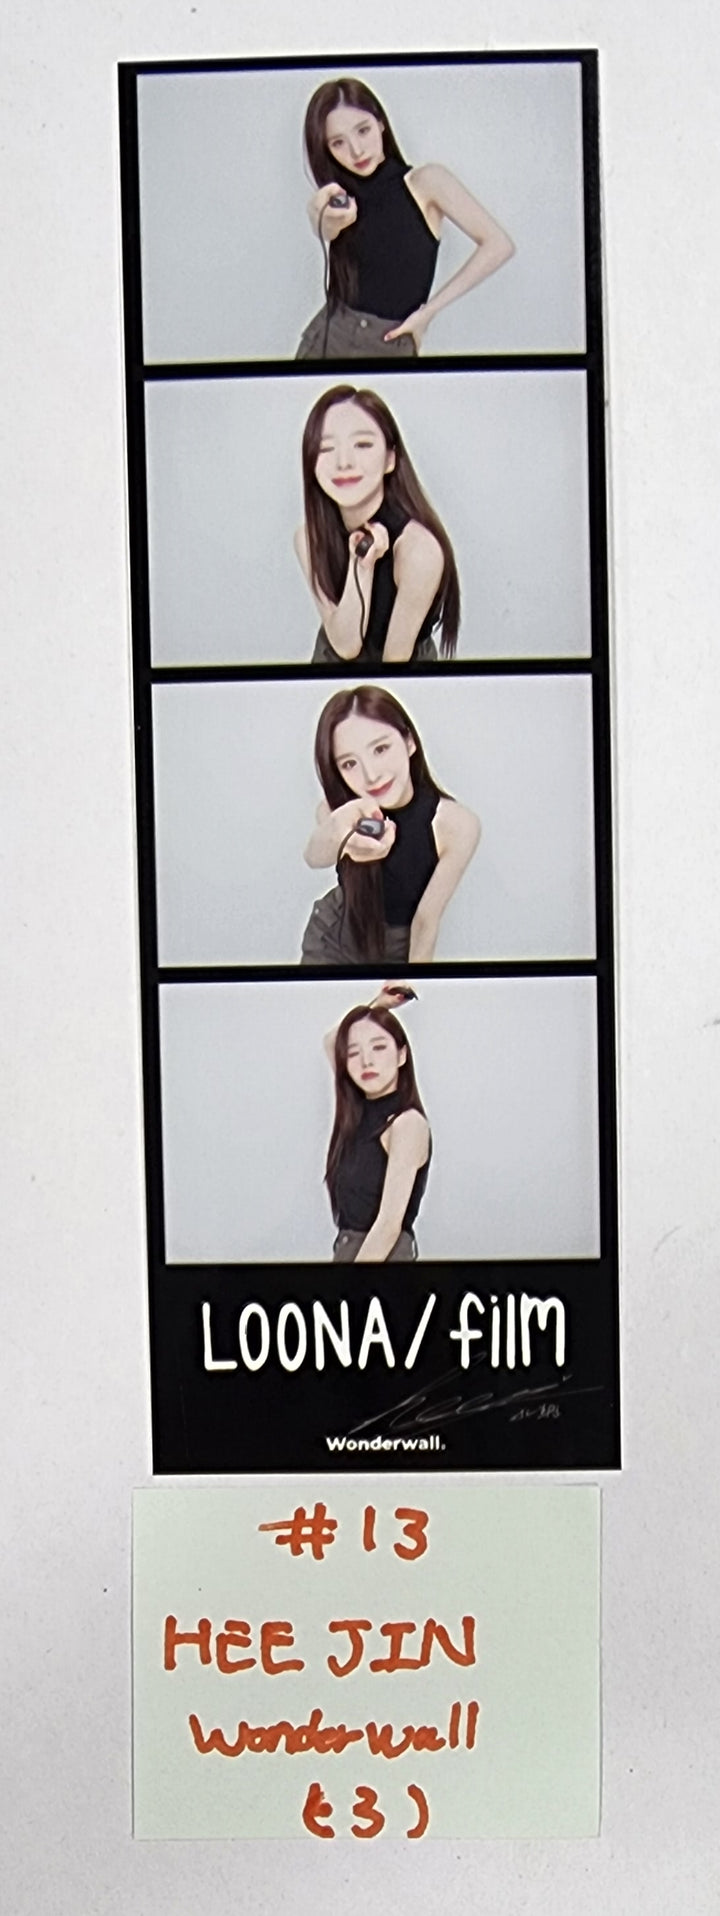 Loona "CONTENTS PACKAGE" - フォトカード、Loona Film、Loona Film Collect Book